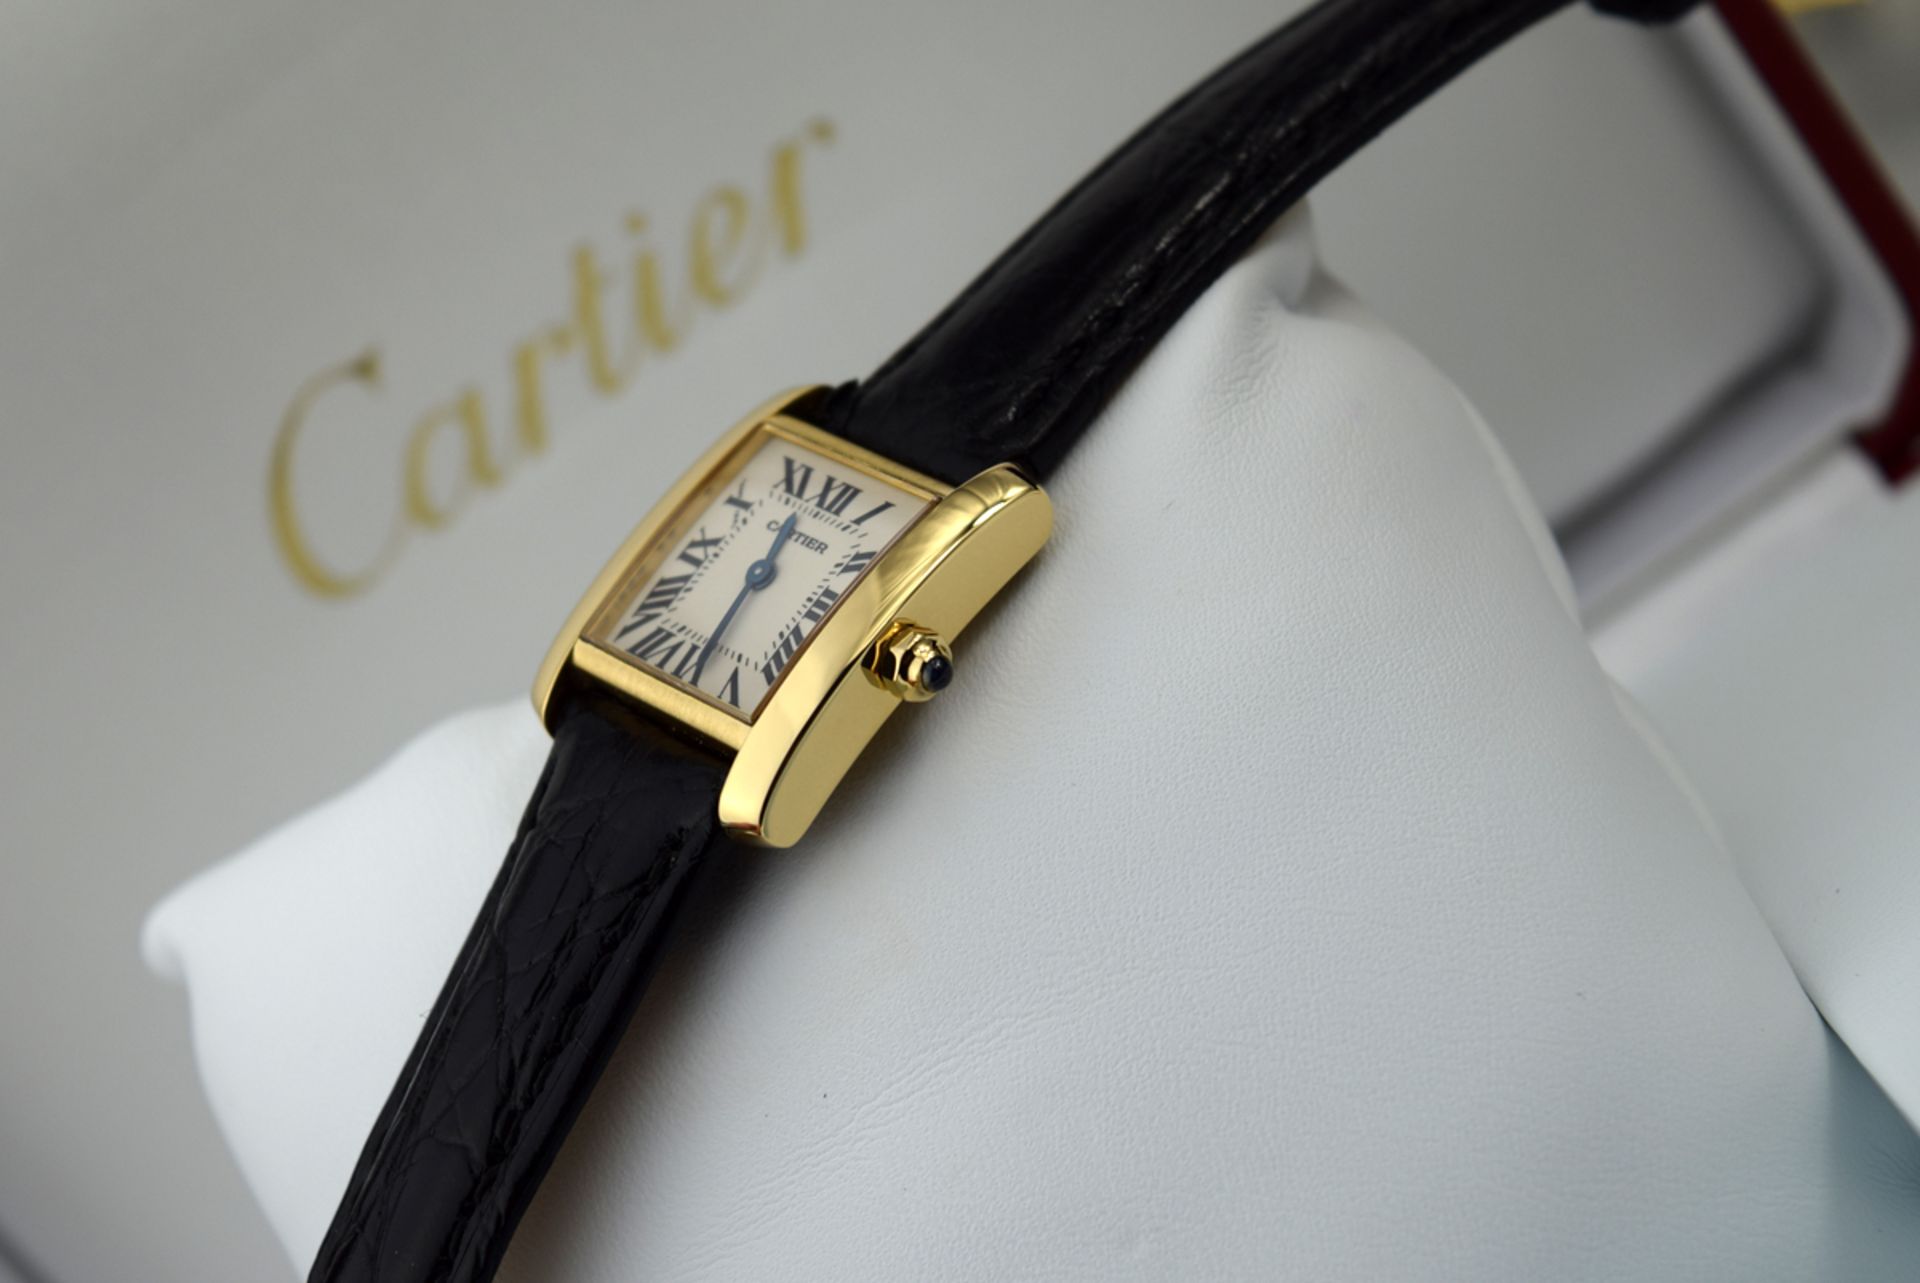 CARTIER - Tank Francaise 18k Gold (2385) - Image 5 of 12